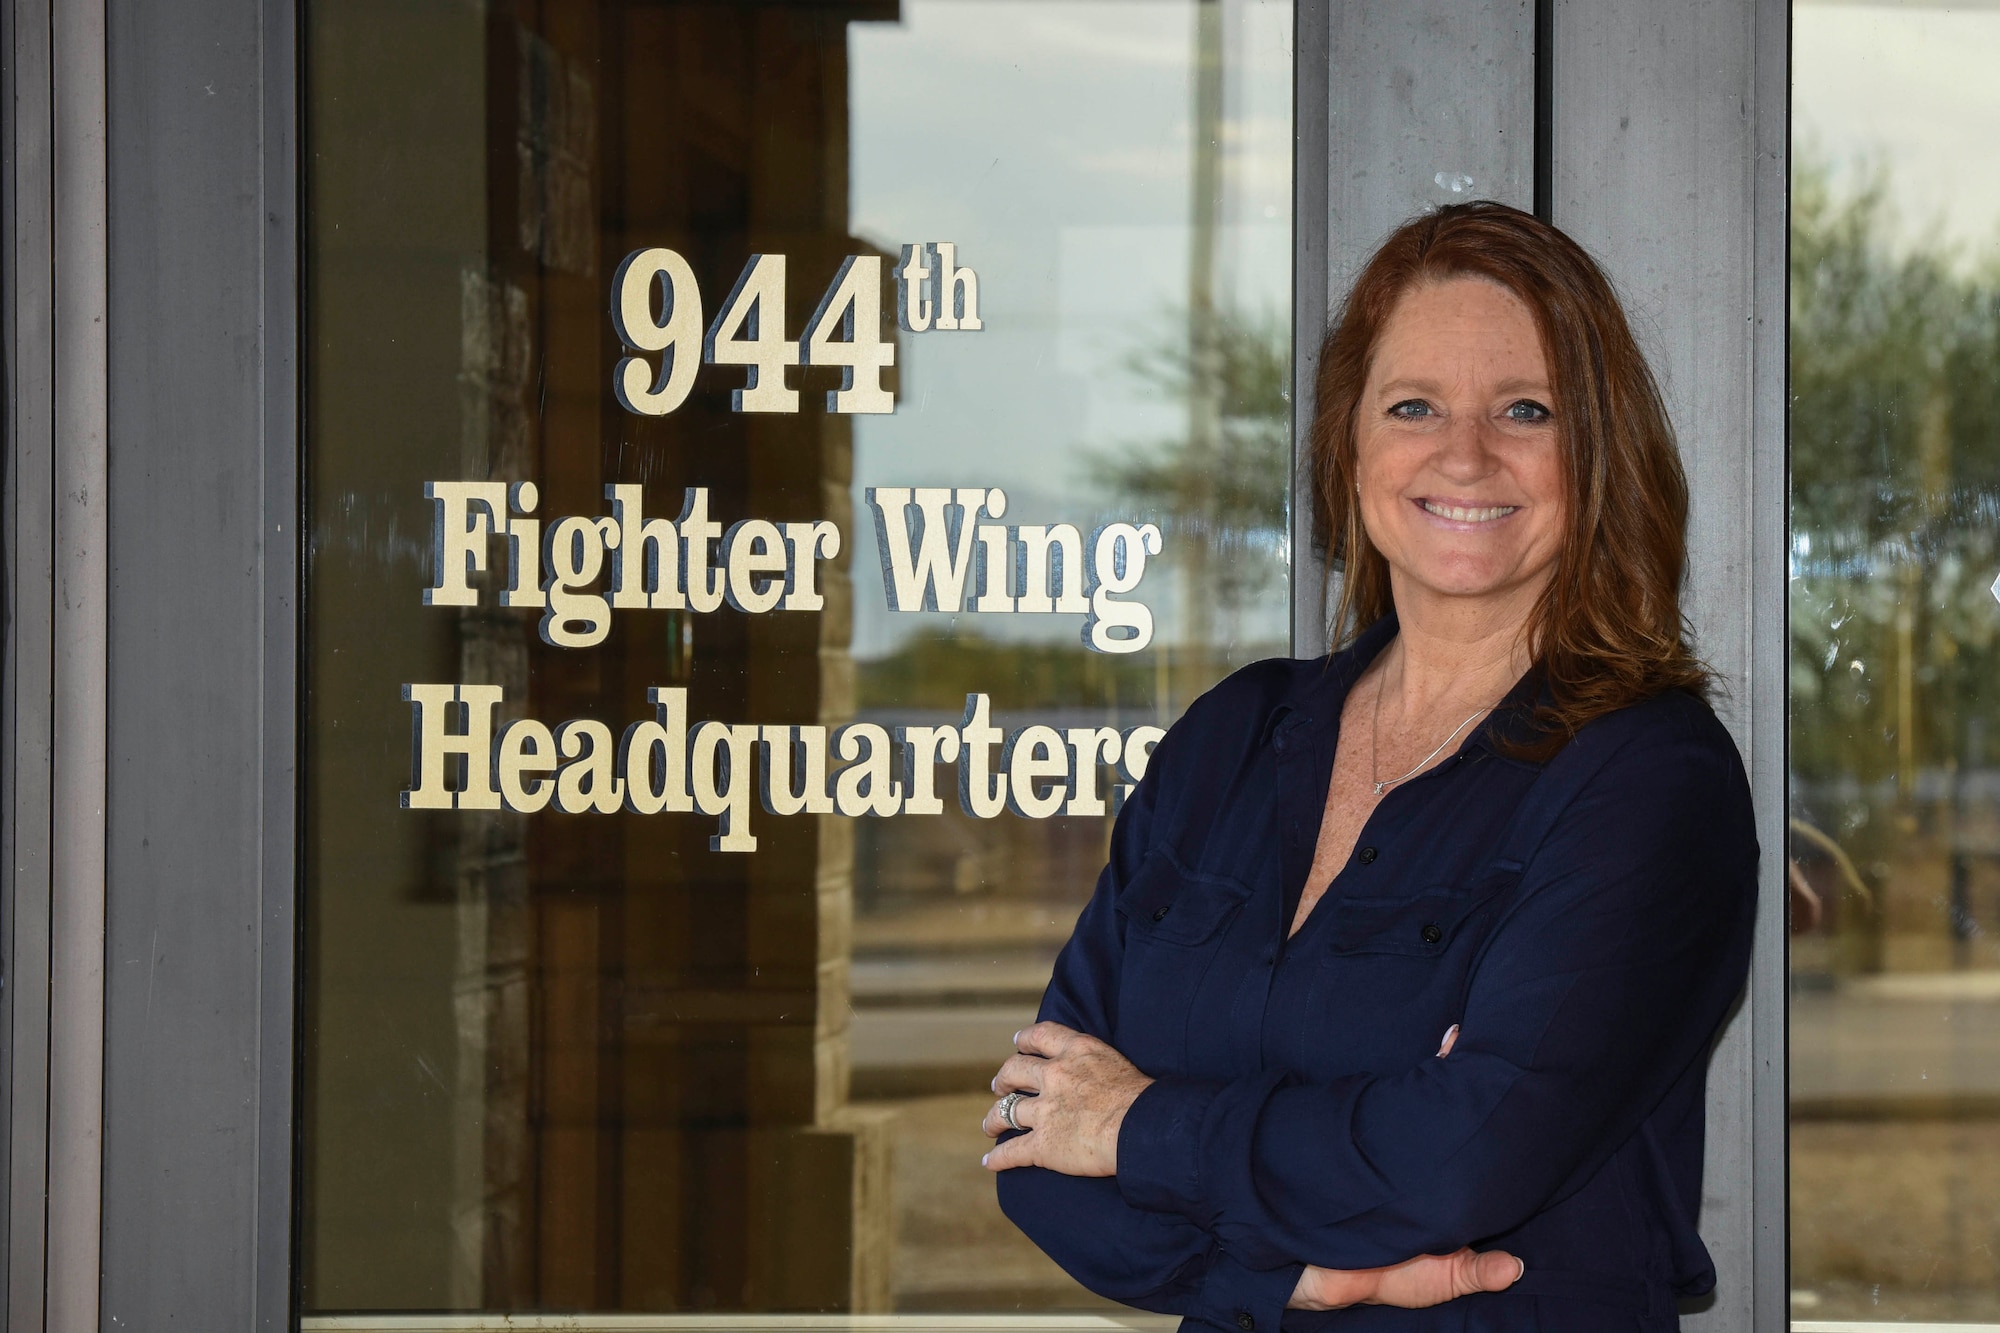 To help Airmen who may be struggling or those who just need to talk, the 944th Fighter Wing’s Director of Psychological Health is at the ready to address mental health concerns faced by these Airmen and their families.